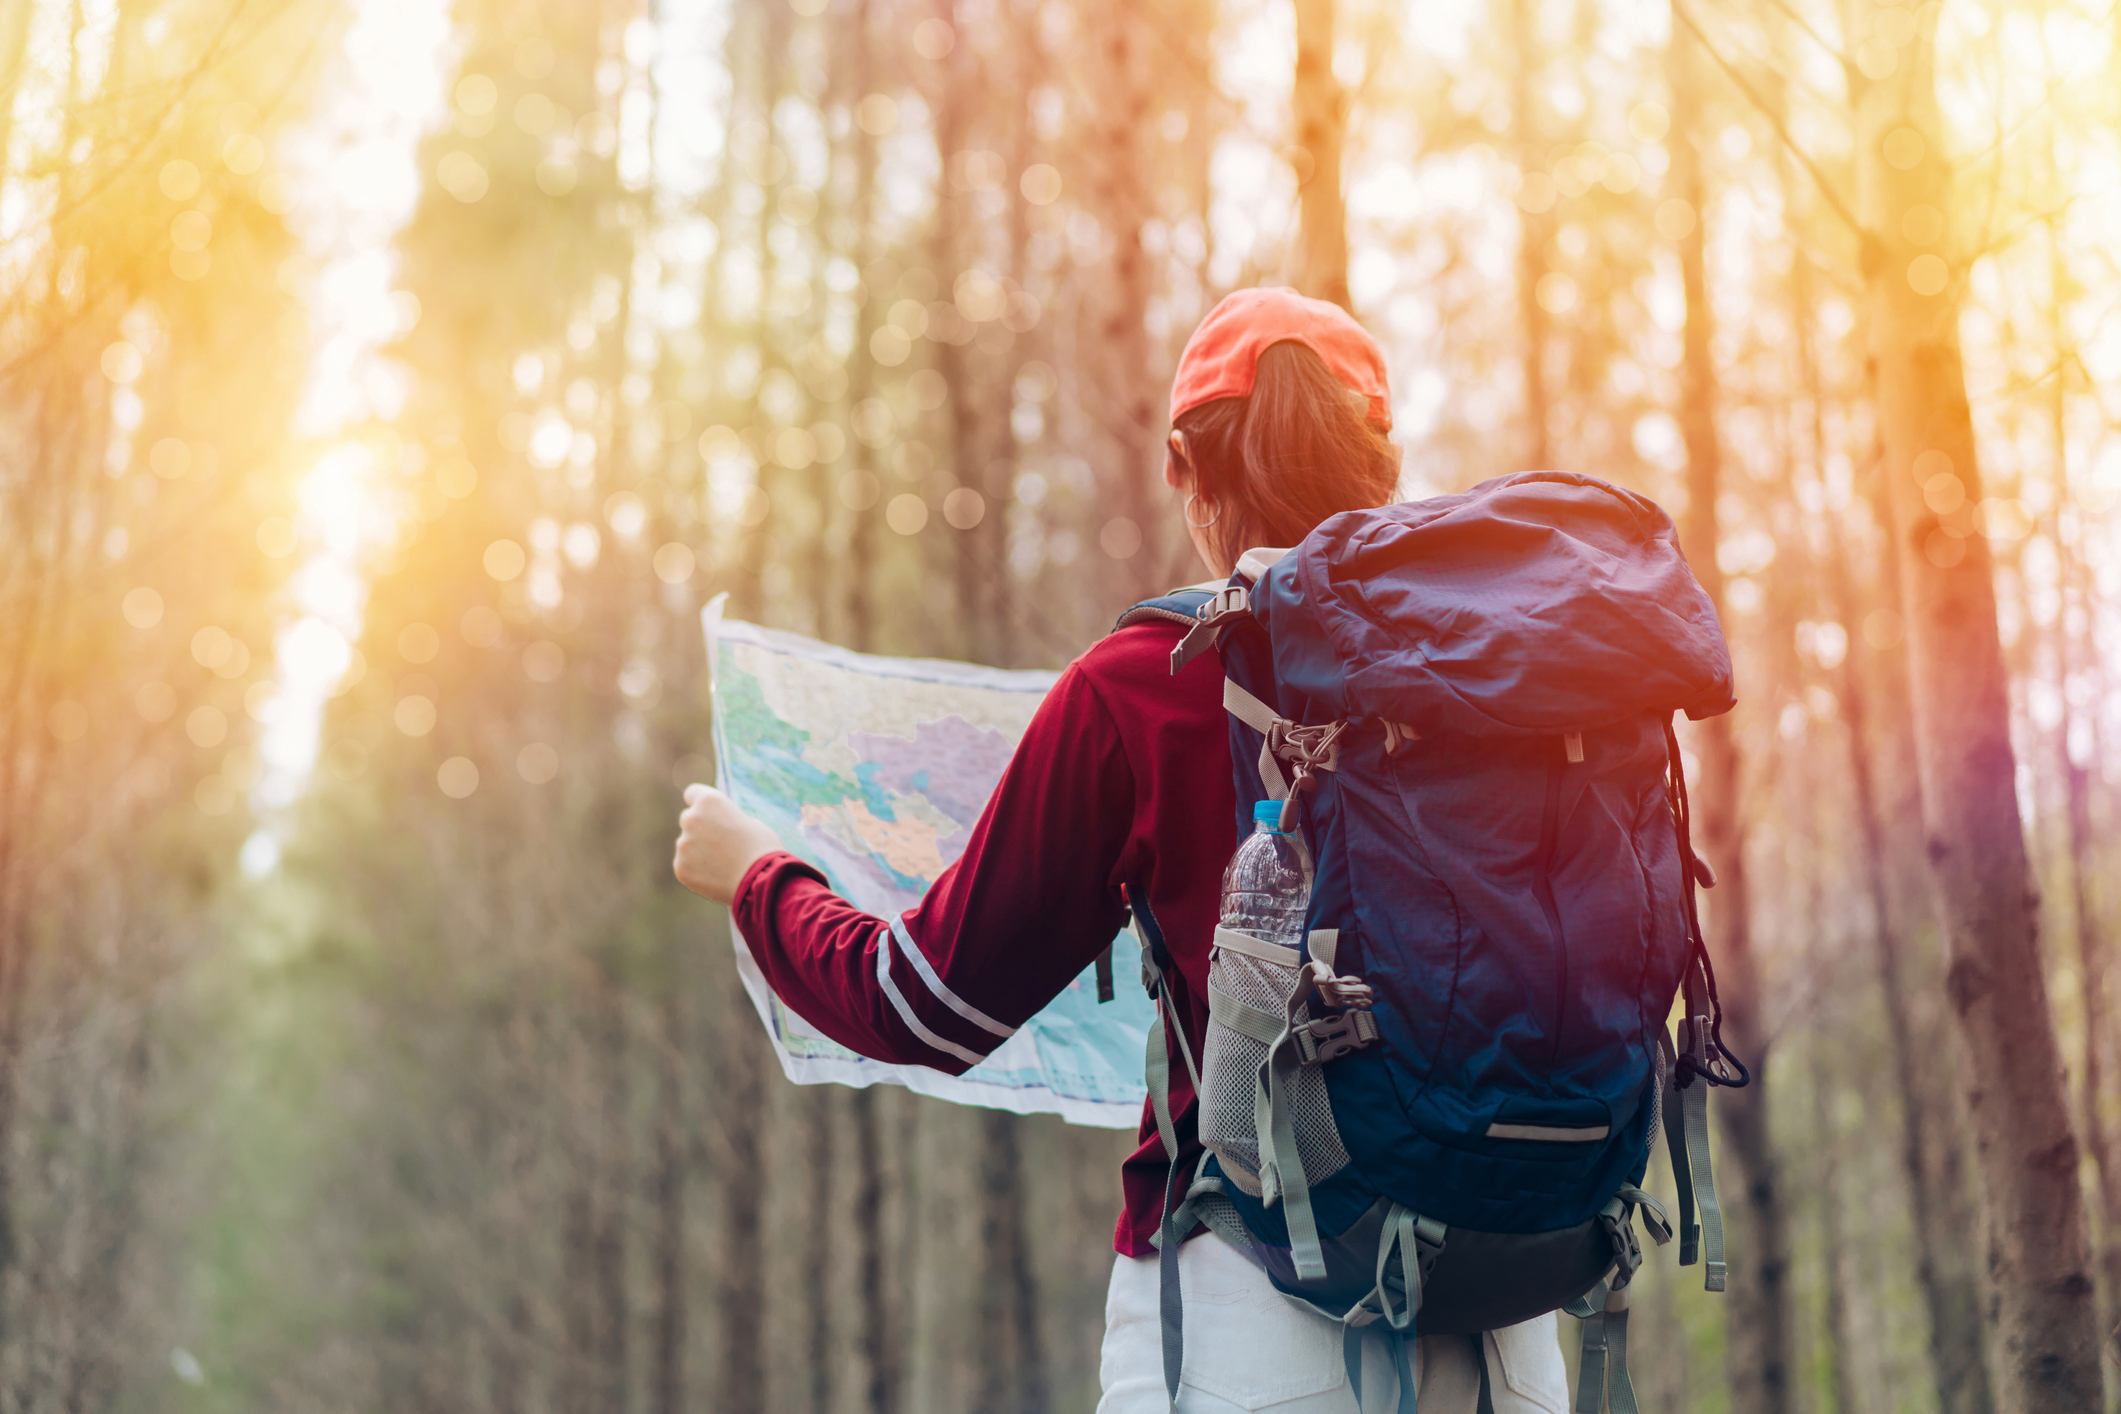 How to Survive Getting Lost While Hiking